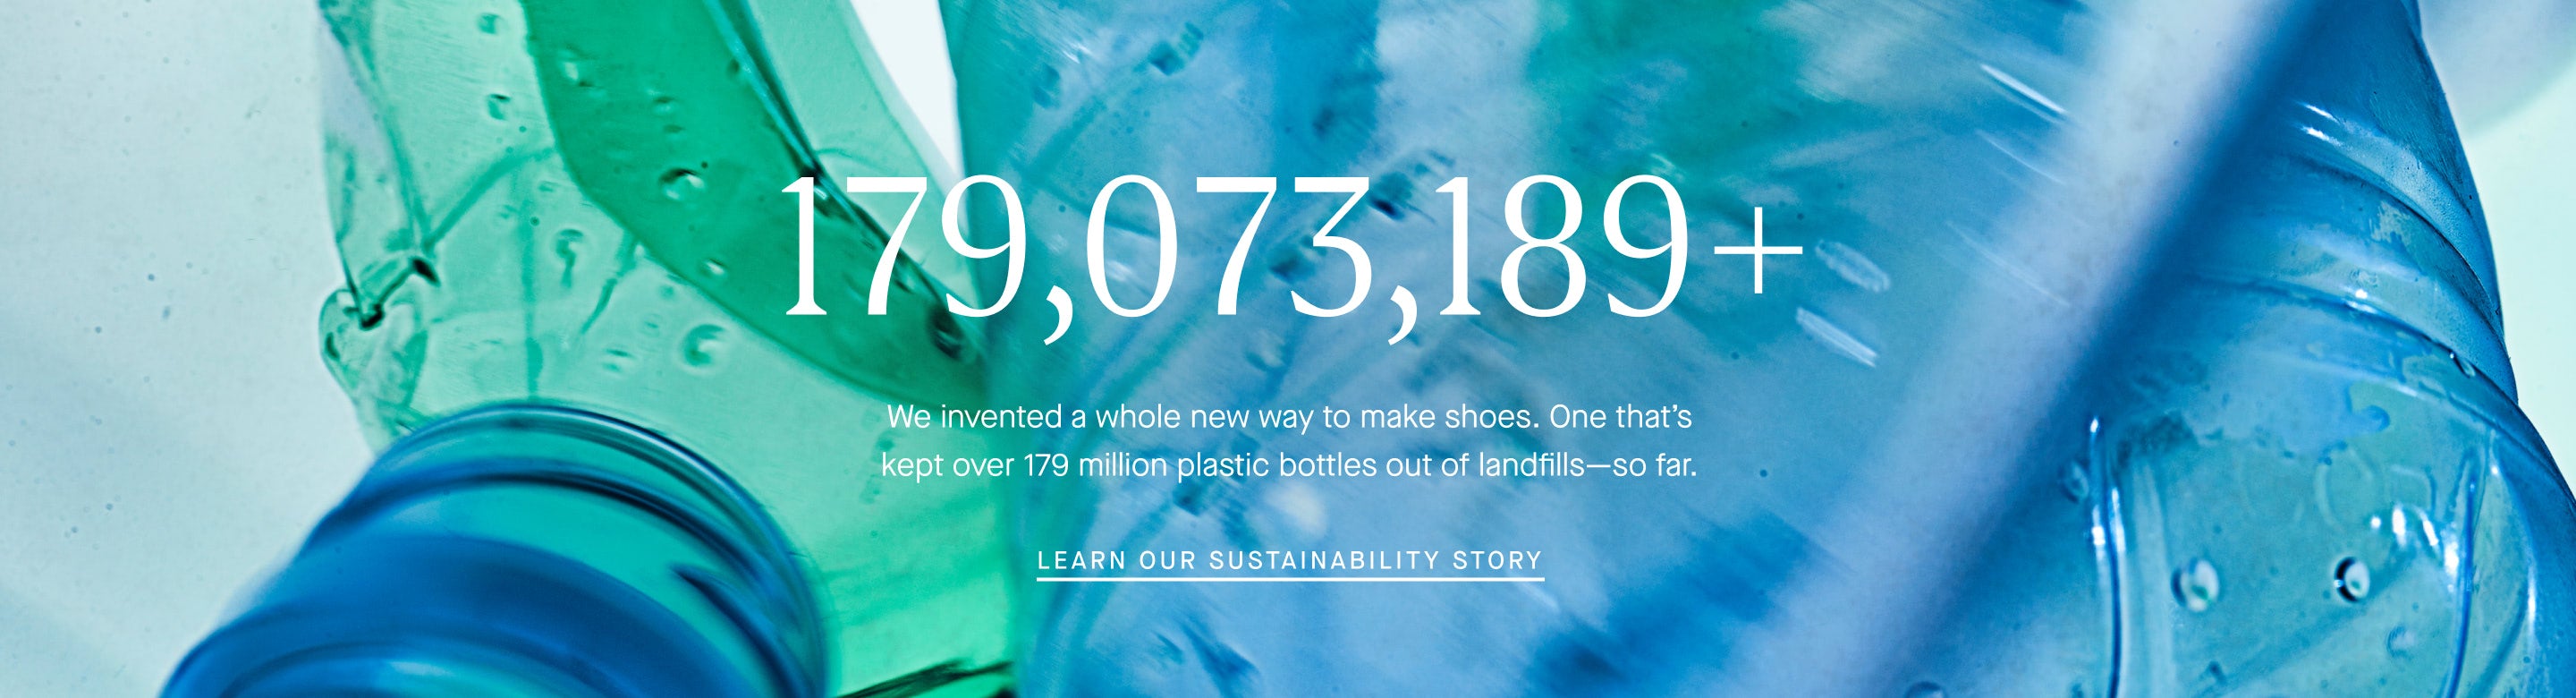 179,073,189+ We invented a whole new way to make shoes. One that's kept over 179 million plastic bottles out of landfills-so far. Learn Our Sustainability Story